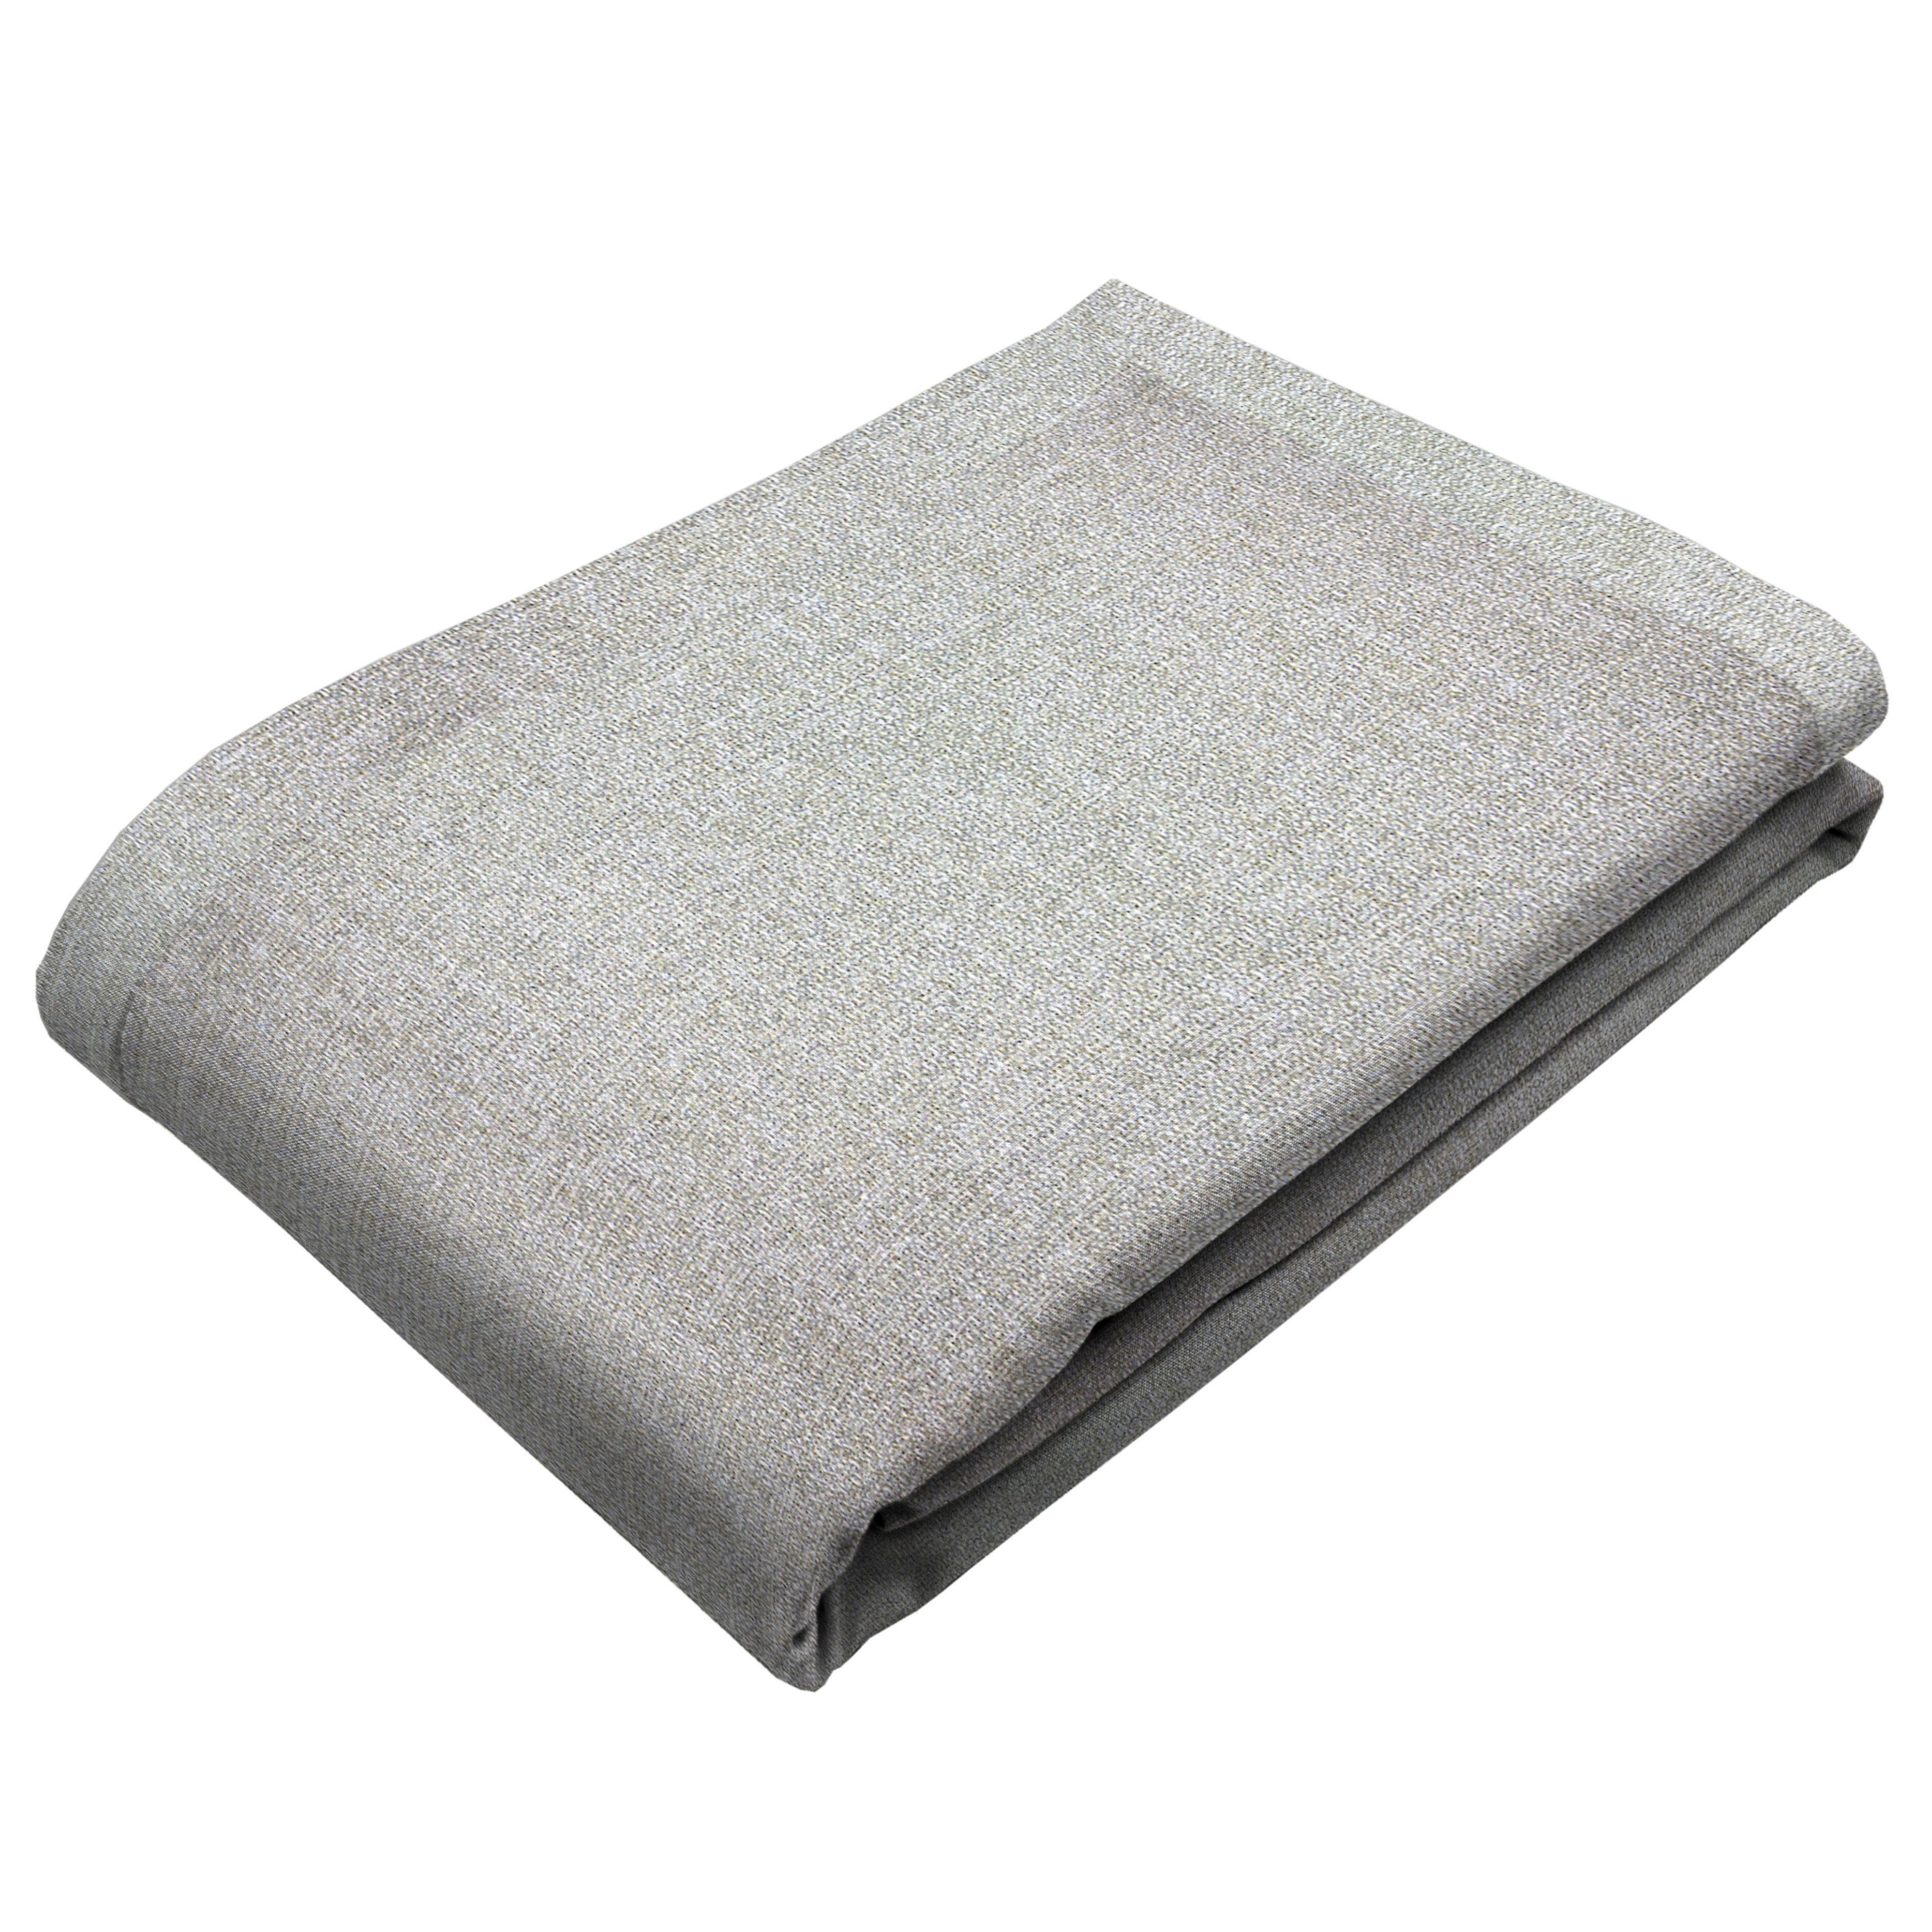 Highlands Natural Throws & Runners, Bed Runner (50cm x 240cm)